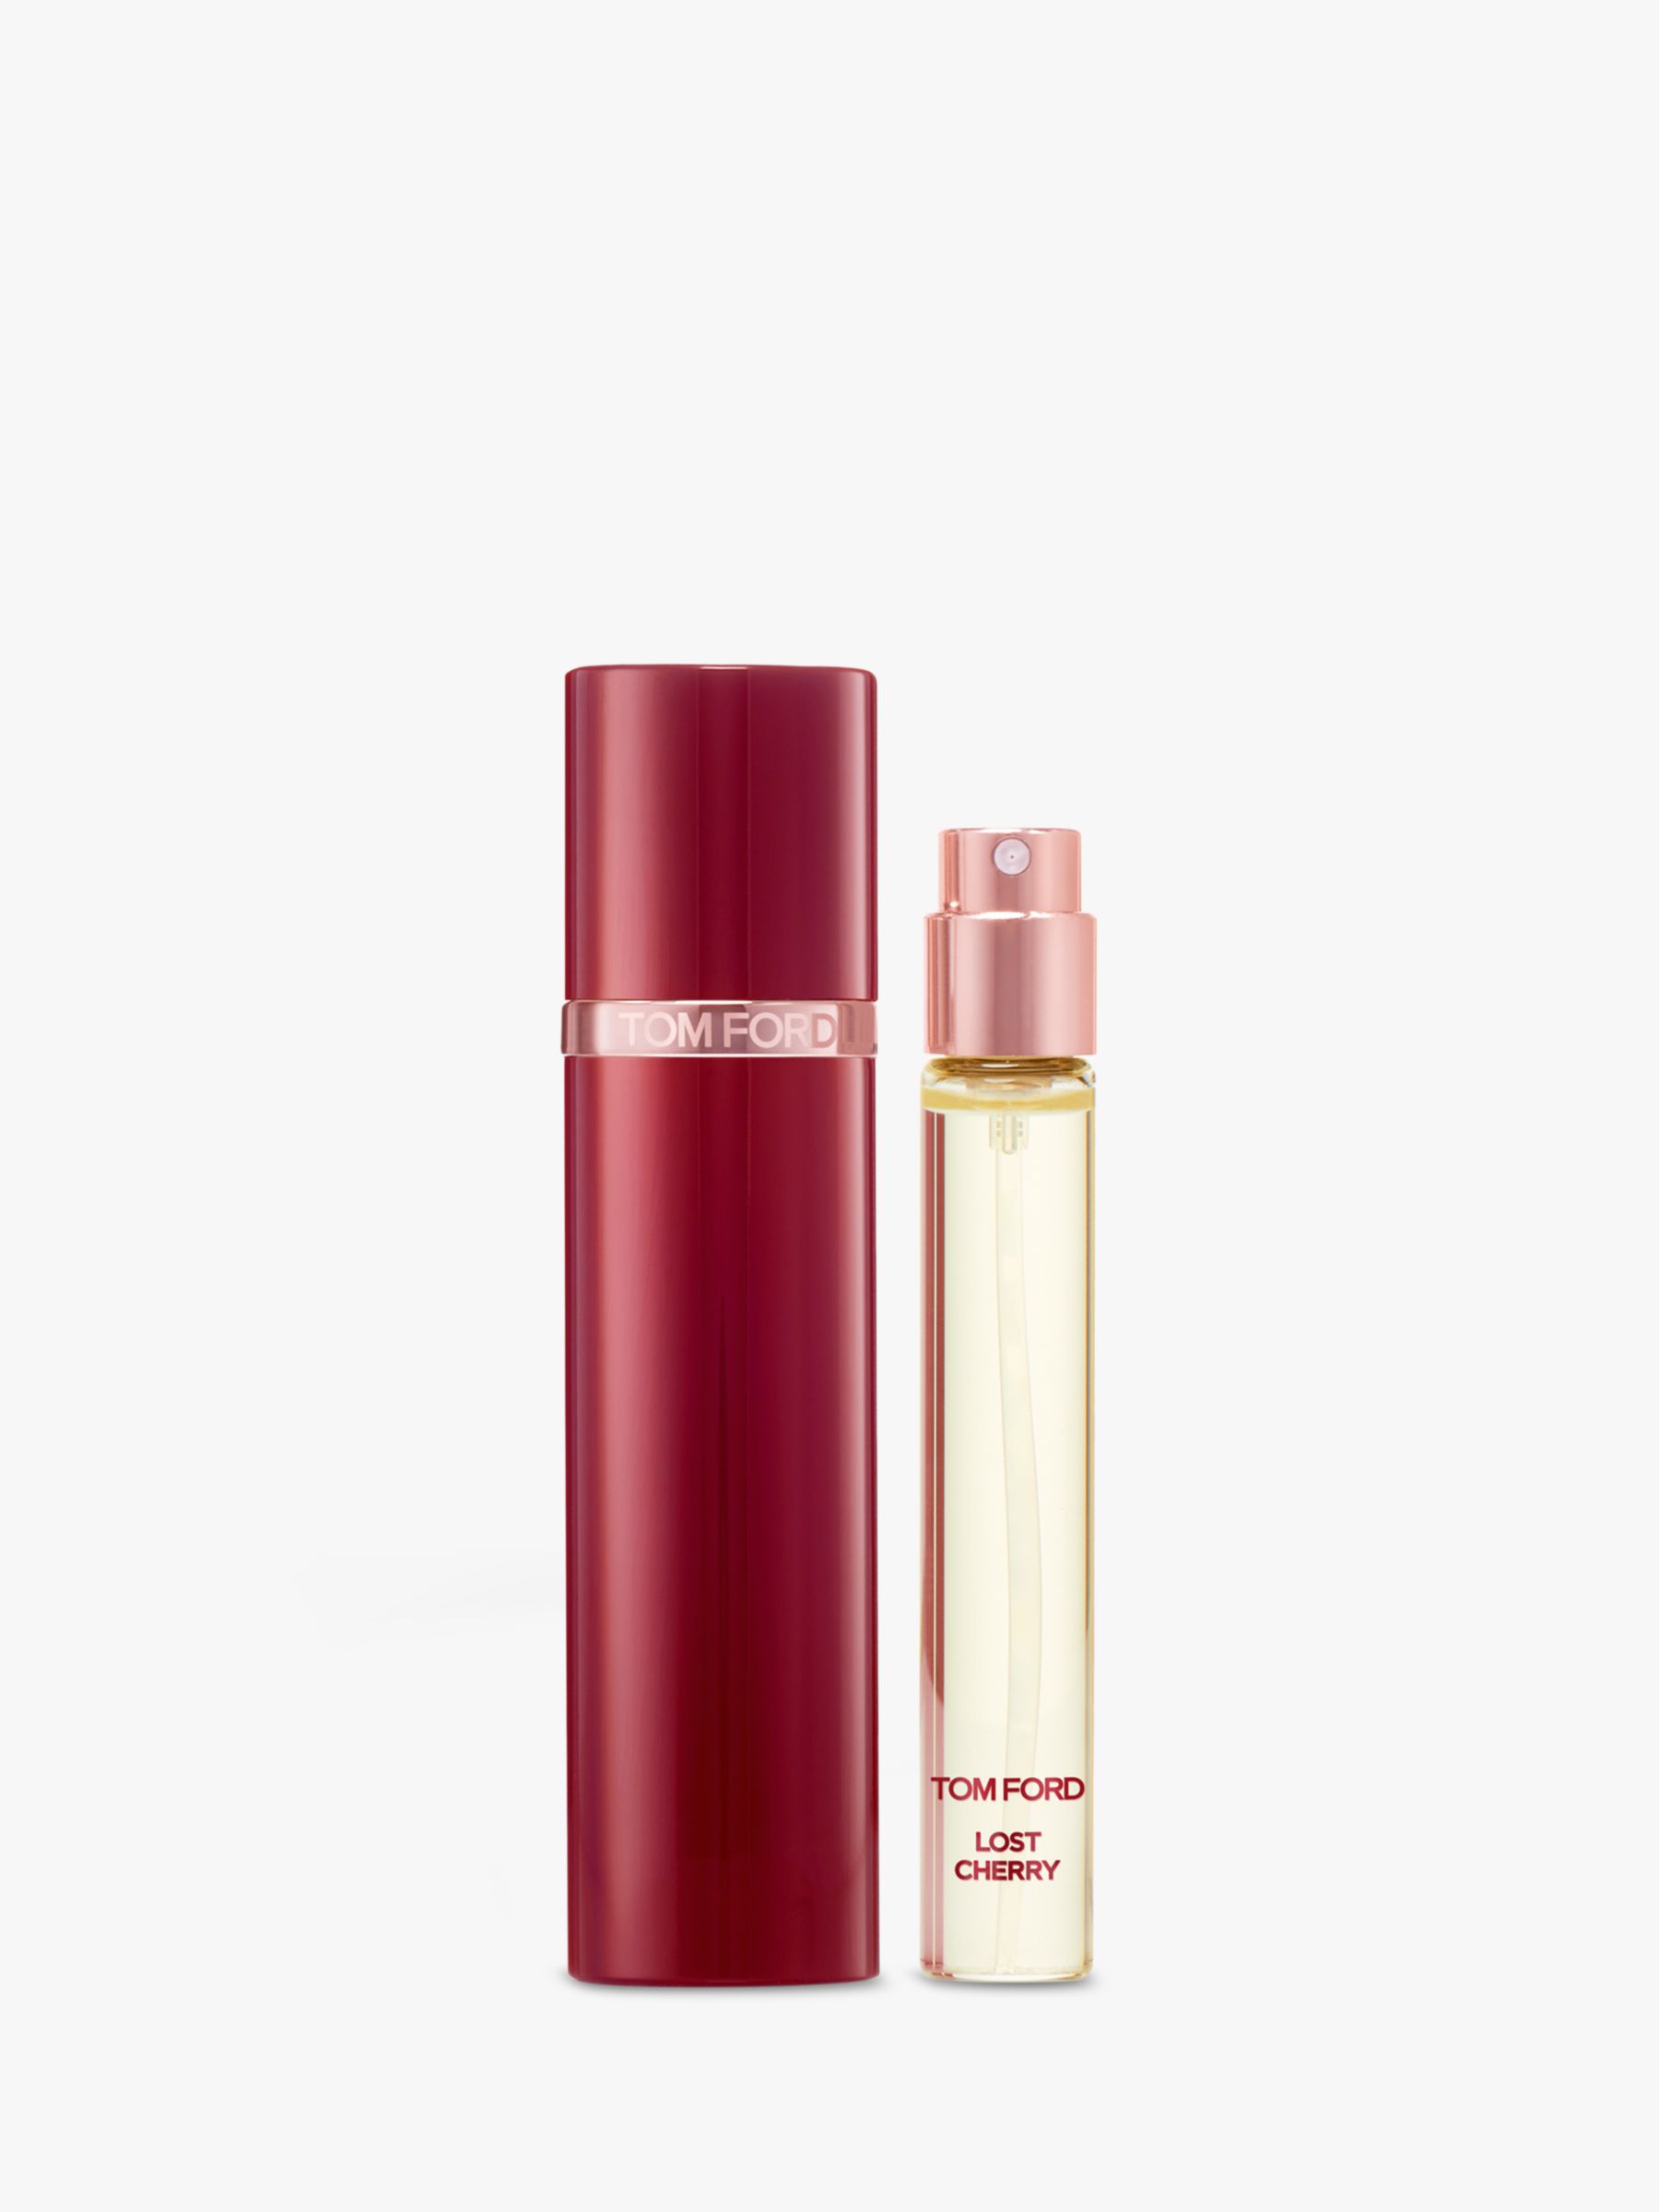 TOM FORD Private Blend Lost Cherry Atomiser, 10ml 1